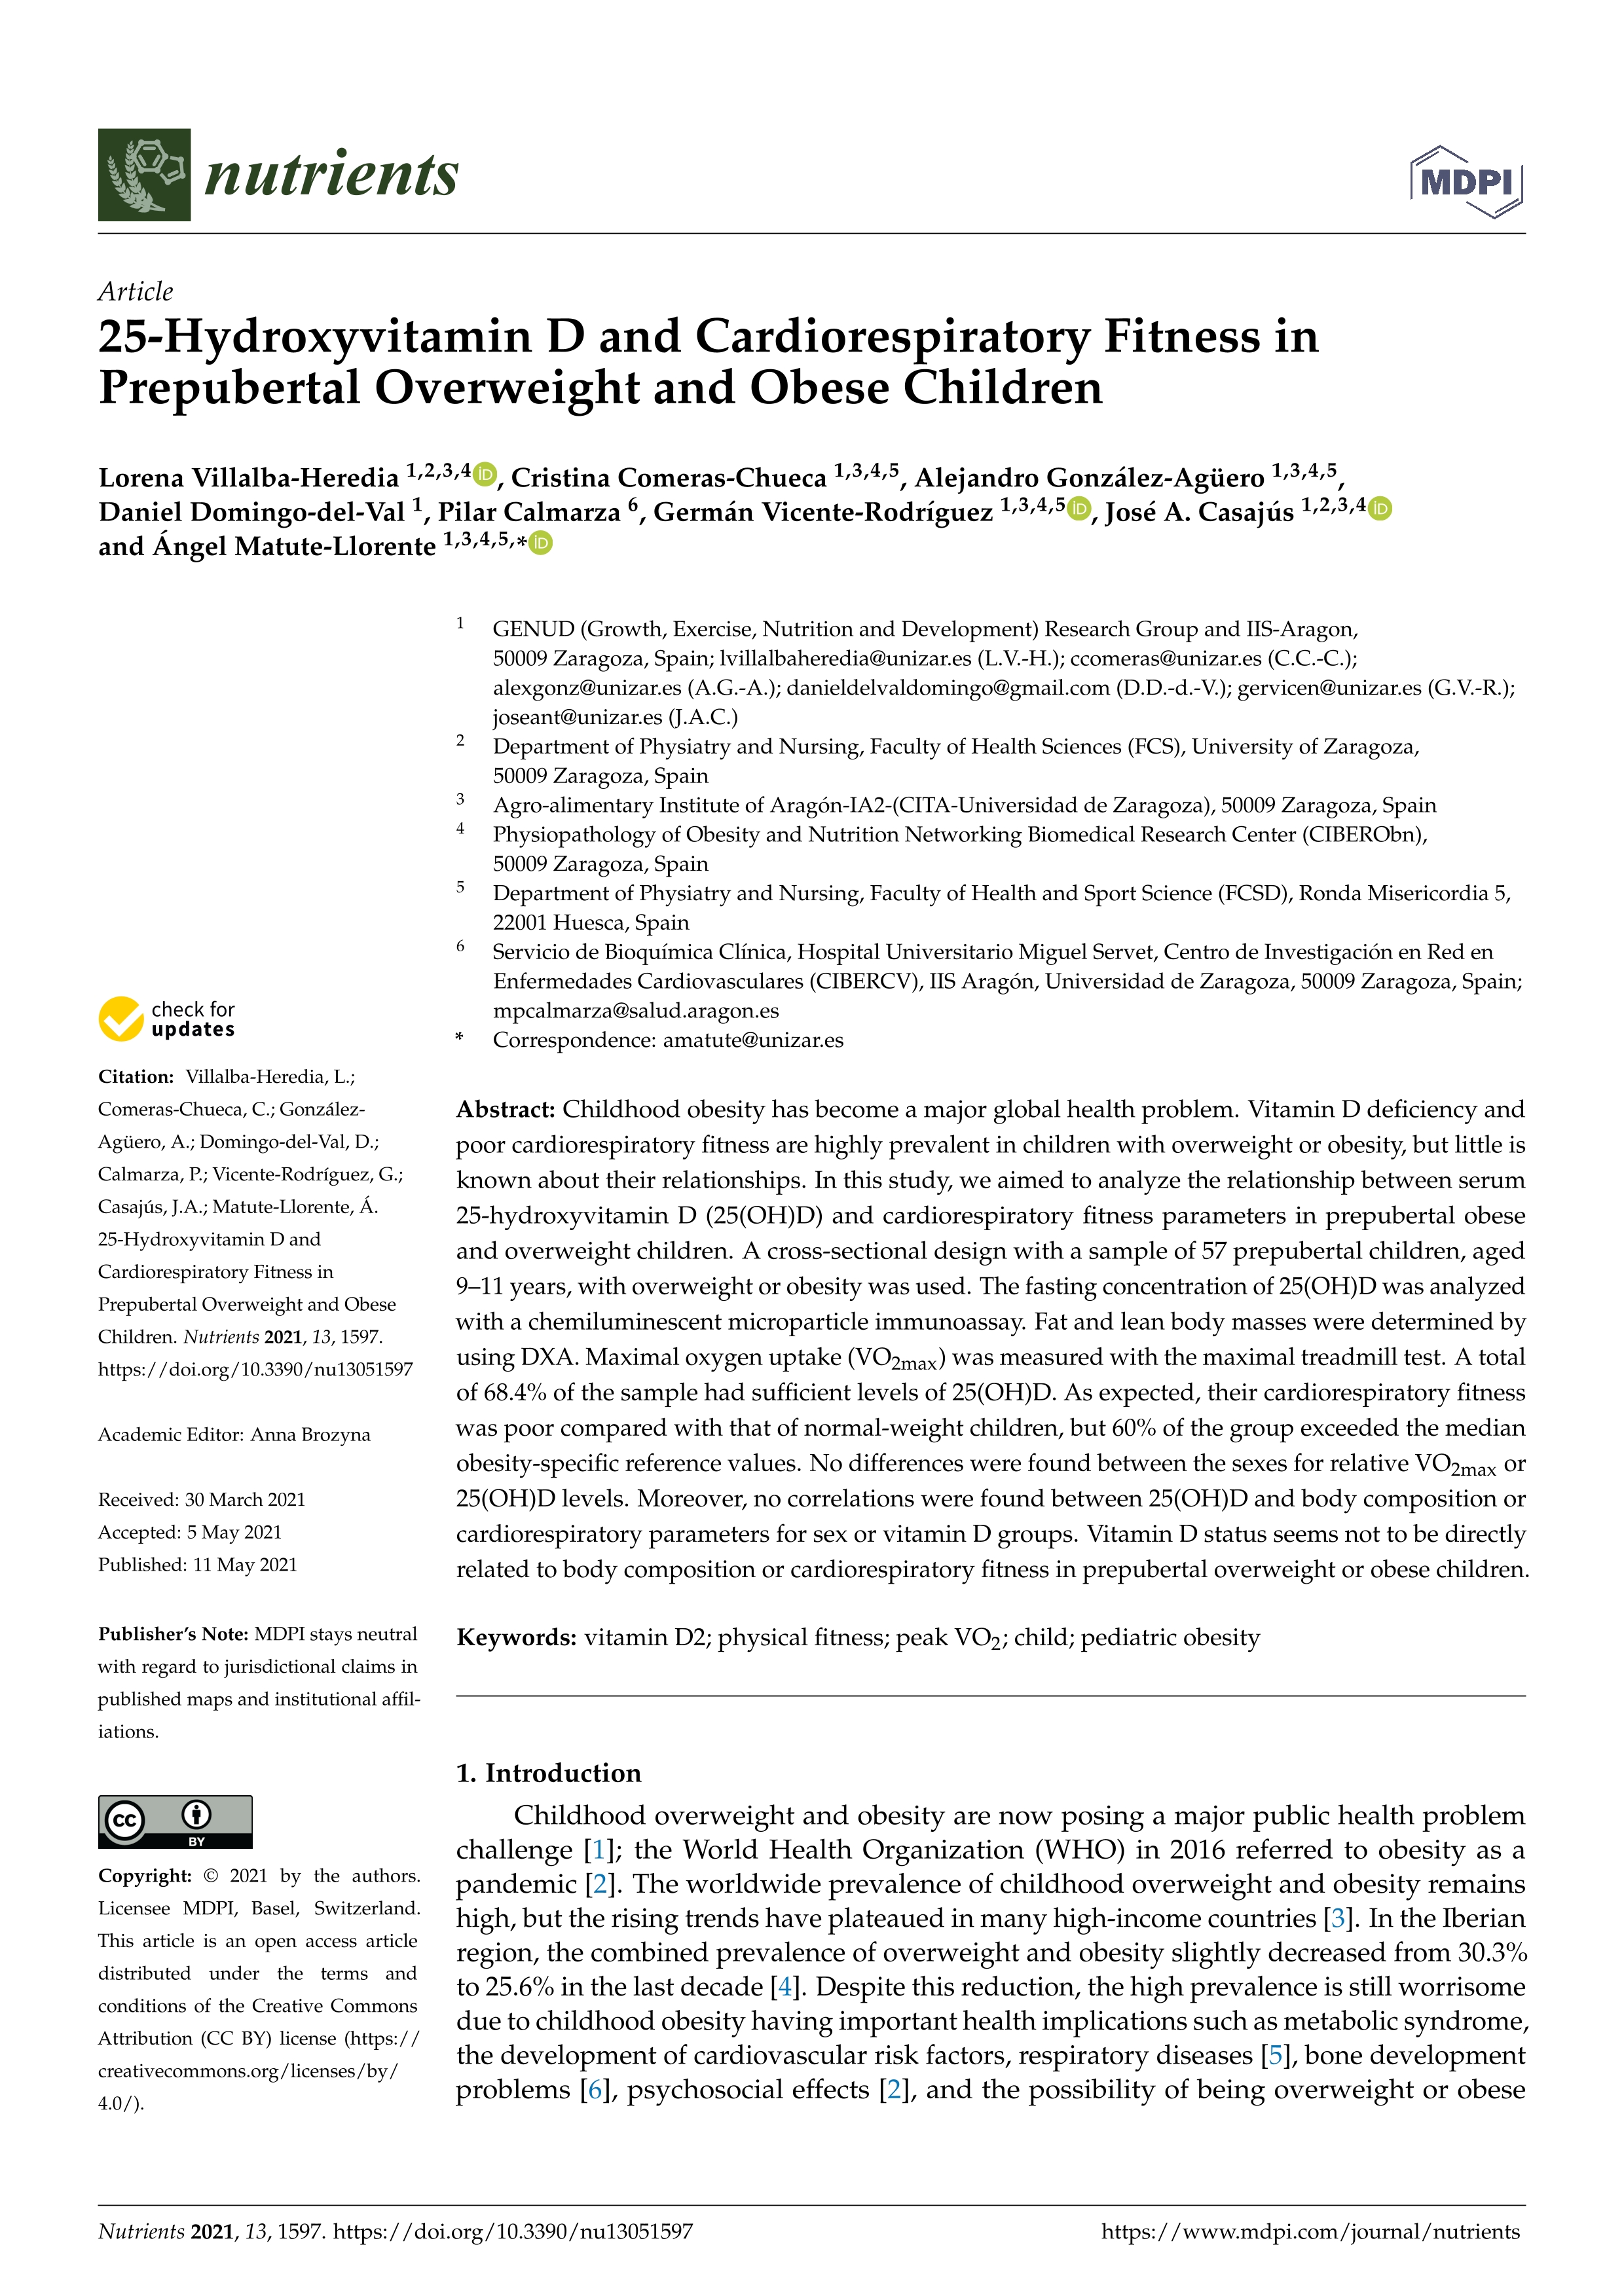 25-Hydroxyvitamin D and Cardiorespiratory Fitness in Prepubertal Overweight and Obese Children